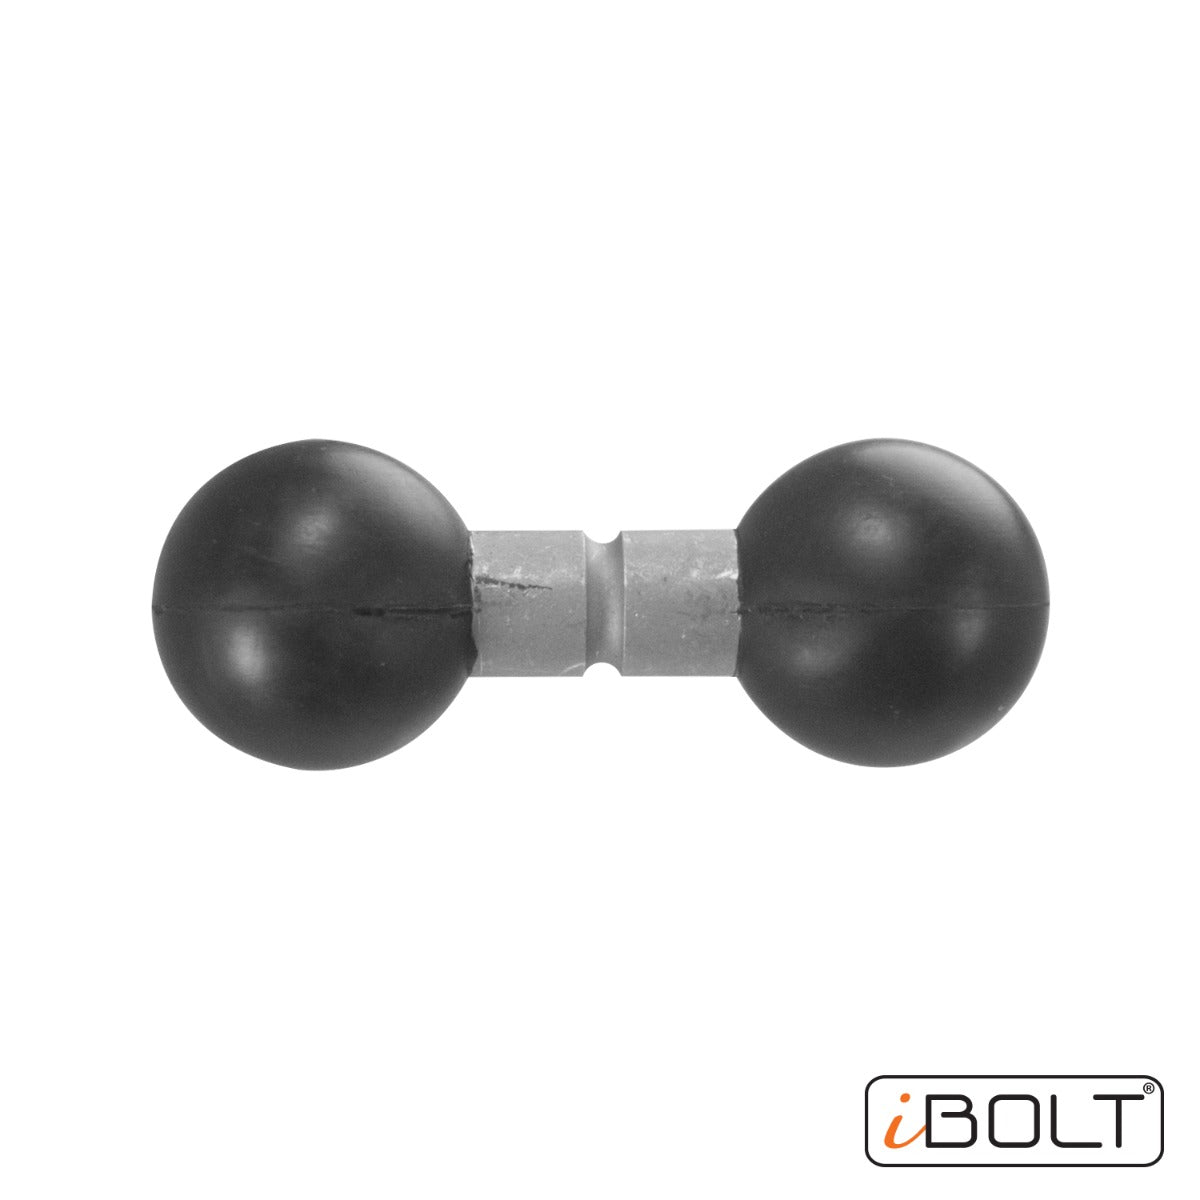 iBOLT™ 25mm / 1 inch to 25mm / 1 inch Metal Extension Ball Adapter